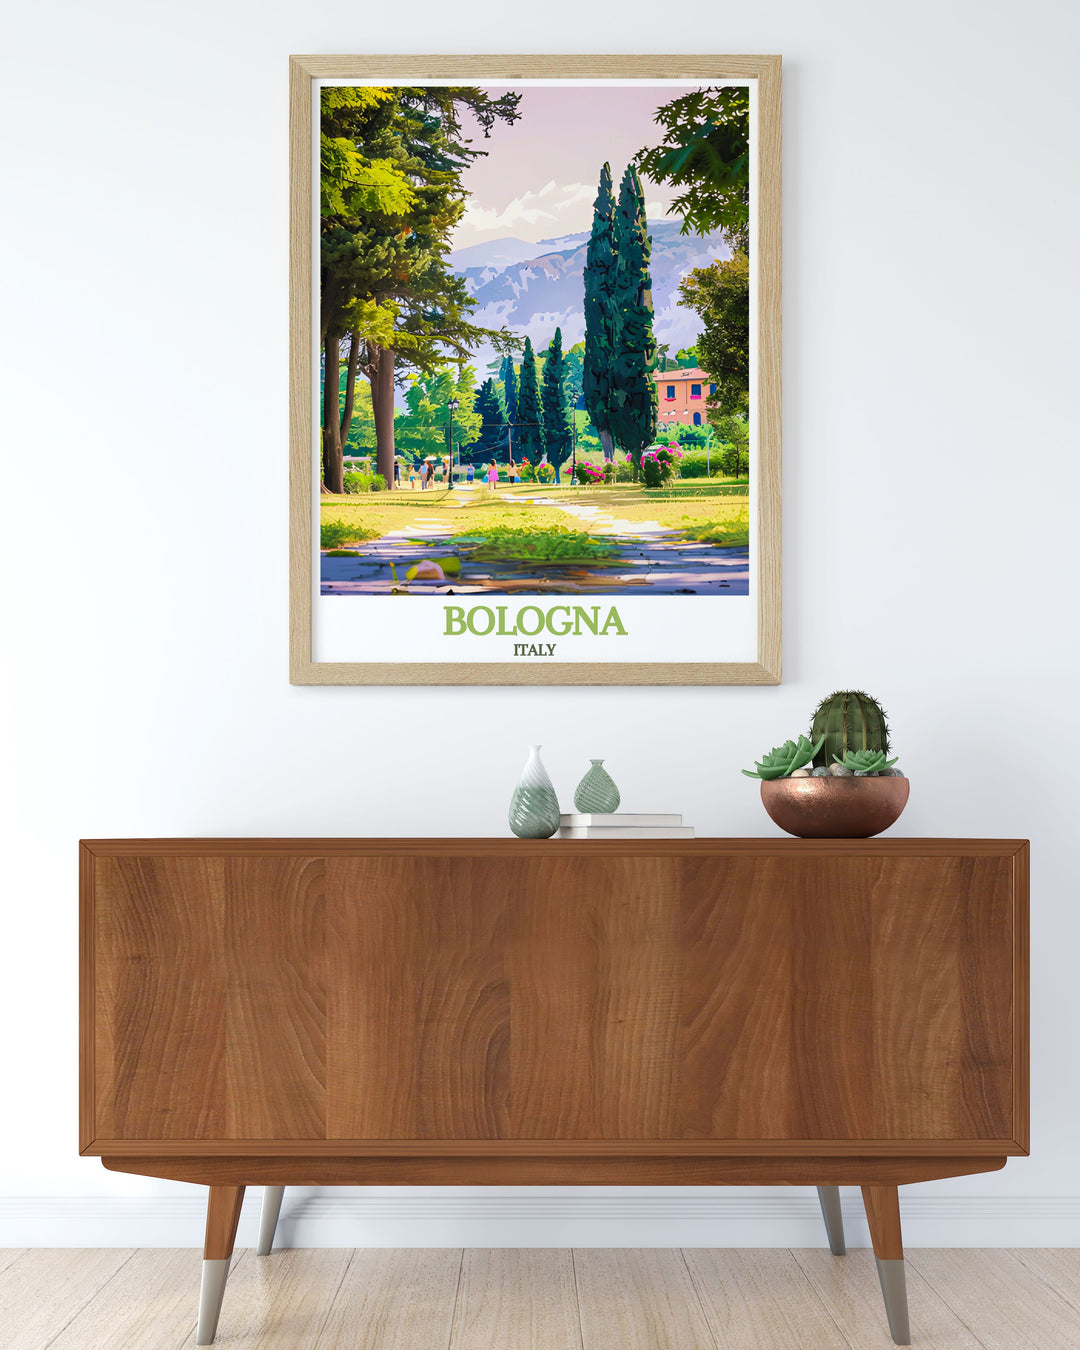 High quality print of Bolognas medieval architecture and the peaceful Giardini Margherita, capturing the essence of this unique Italian region. Ideal for art lovers who appreciate both history and nature.